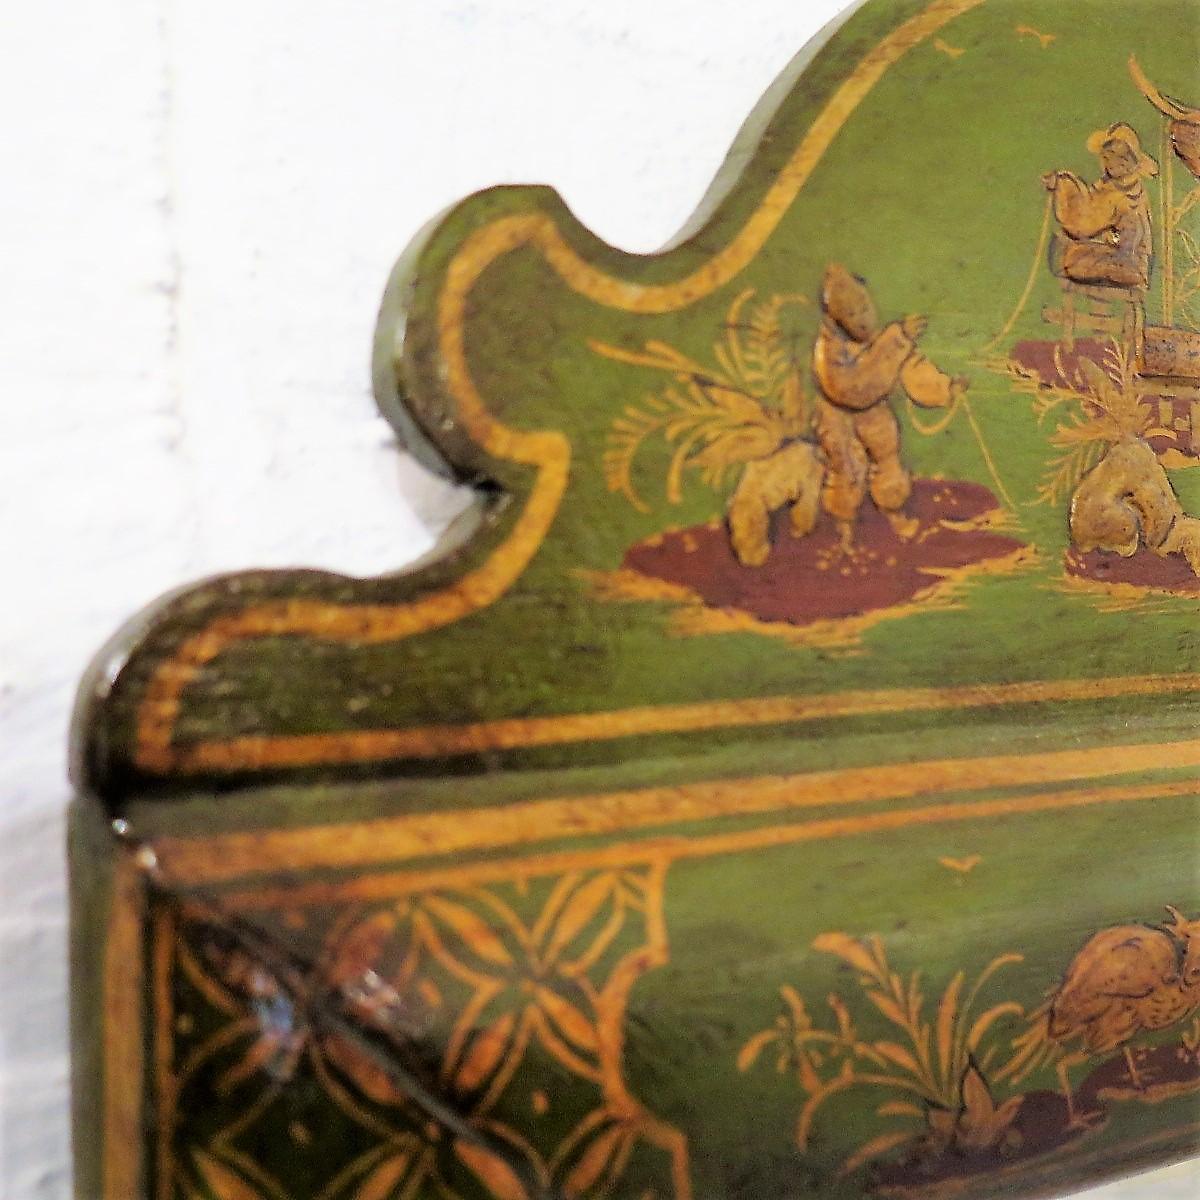 A chinoiserie lacquer cushion mirror of convenient size, restored in green lacquer, the highly polished frame retaining its very heavy plate glass.